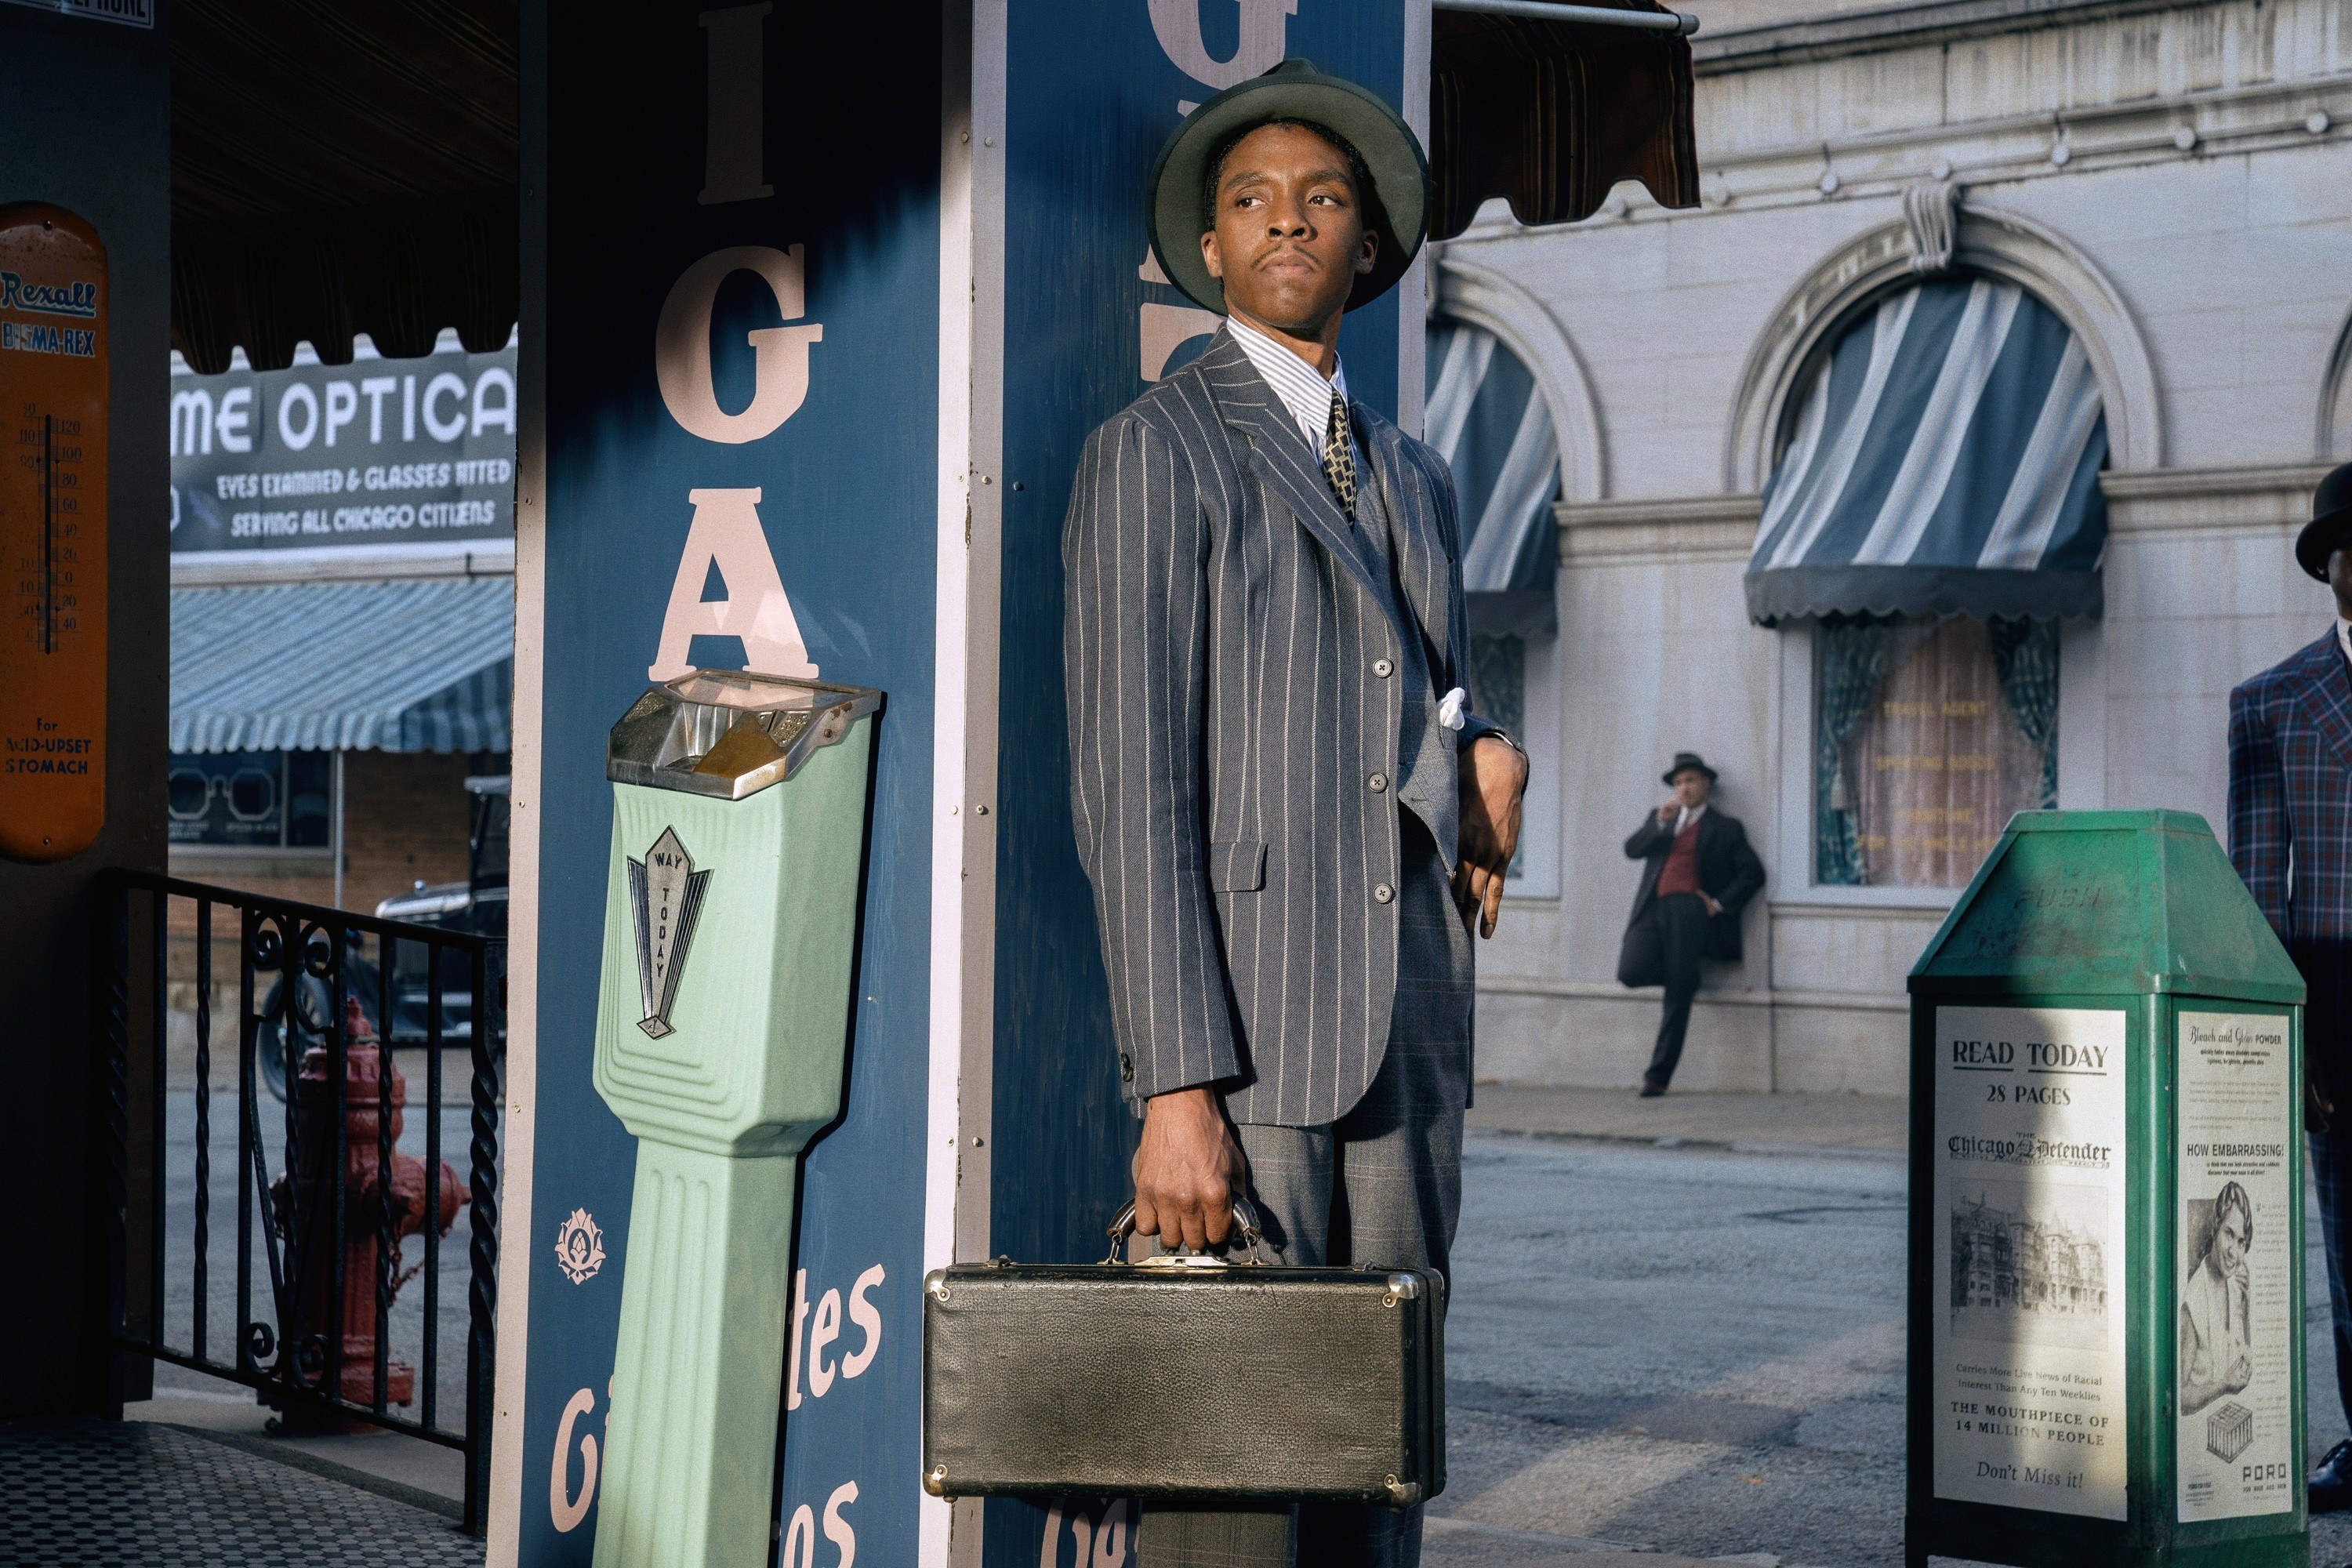 Boseman stands next to a parking meter while wearing a suit and carrying a suitcase